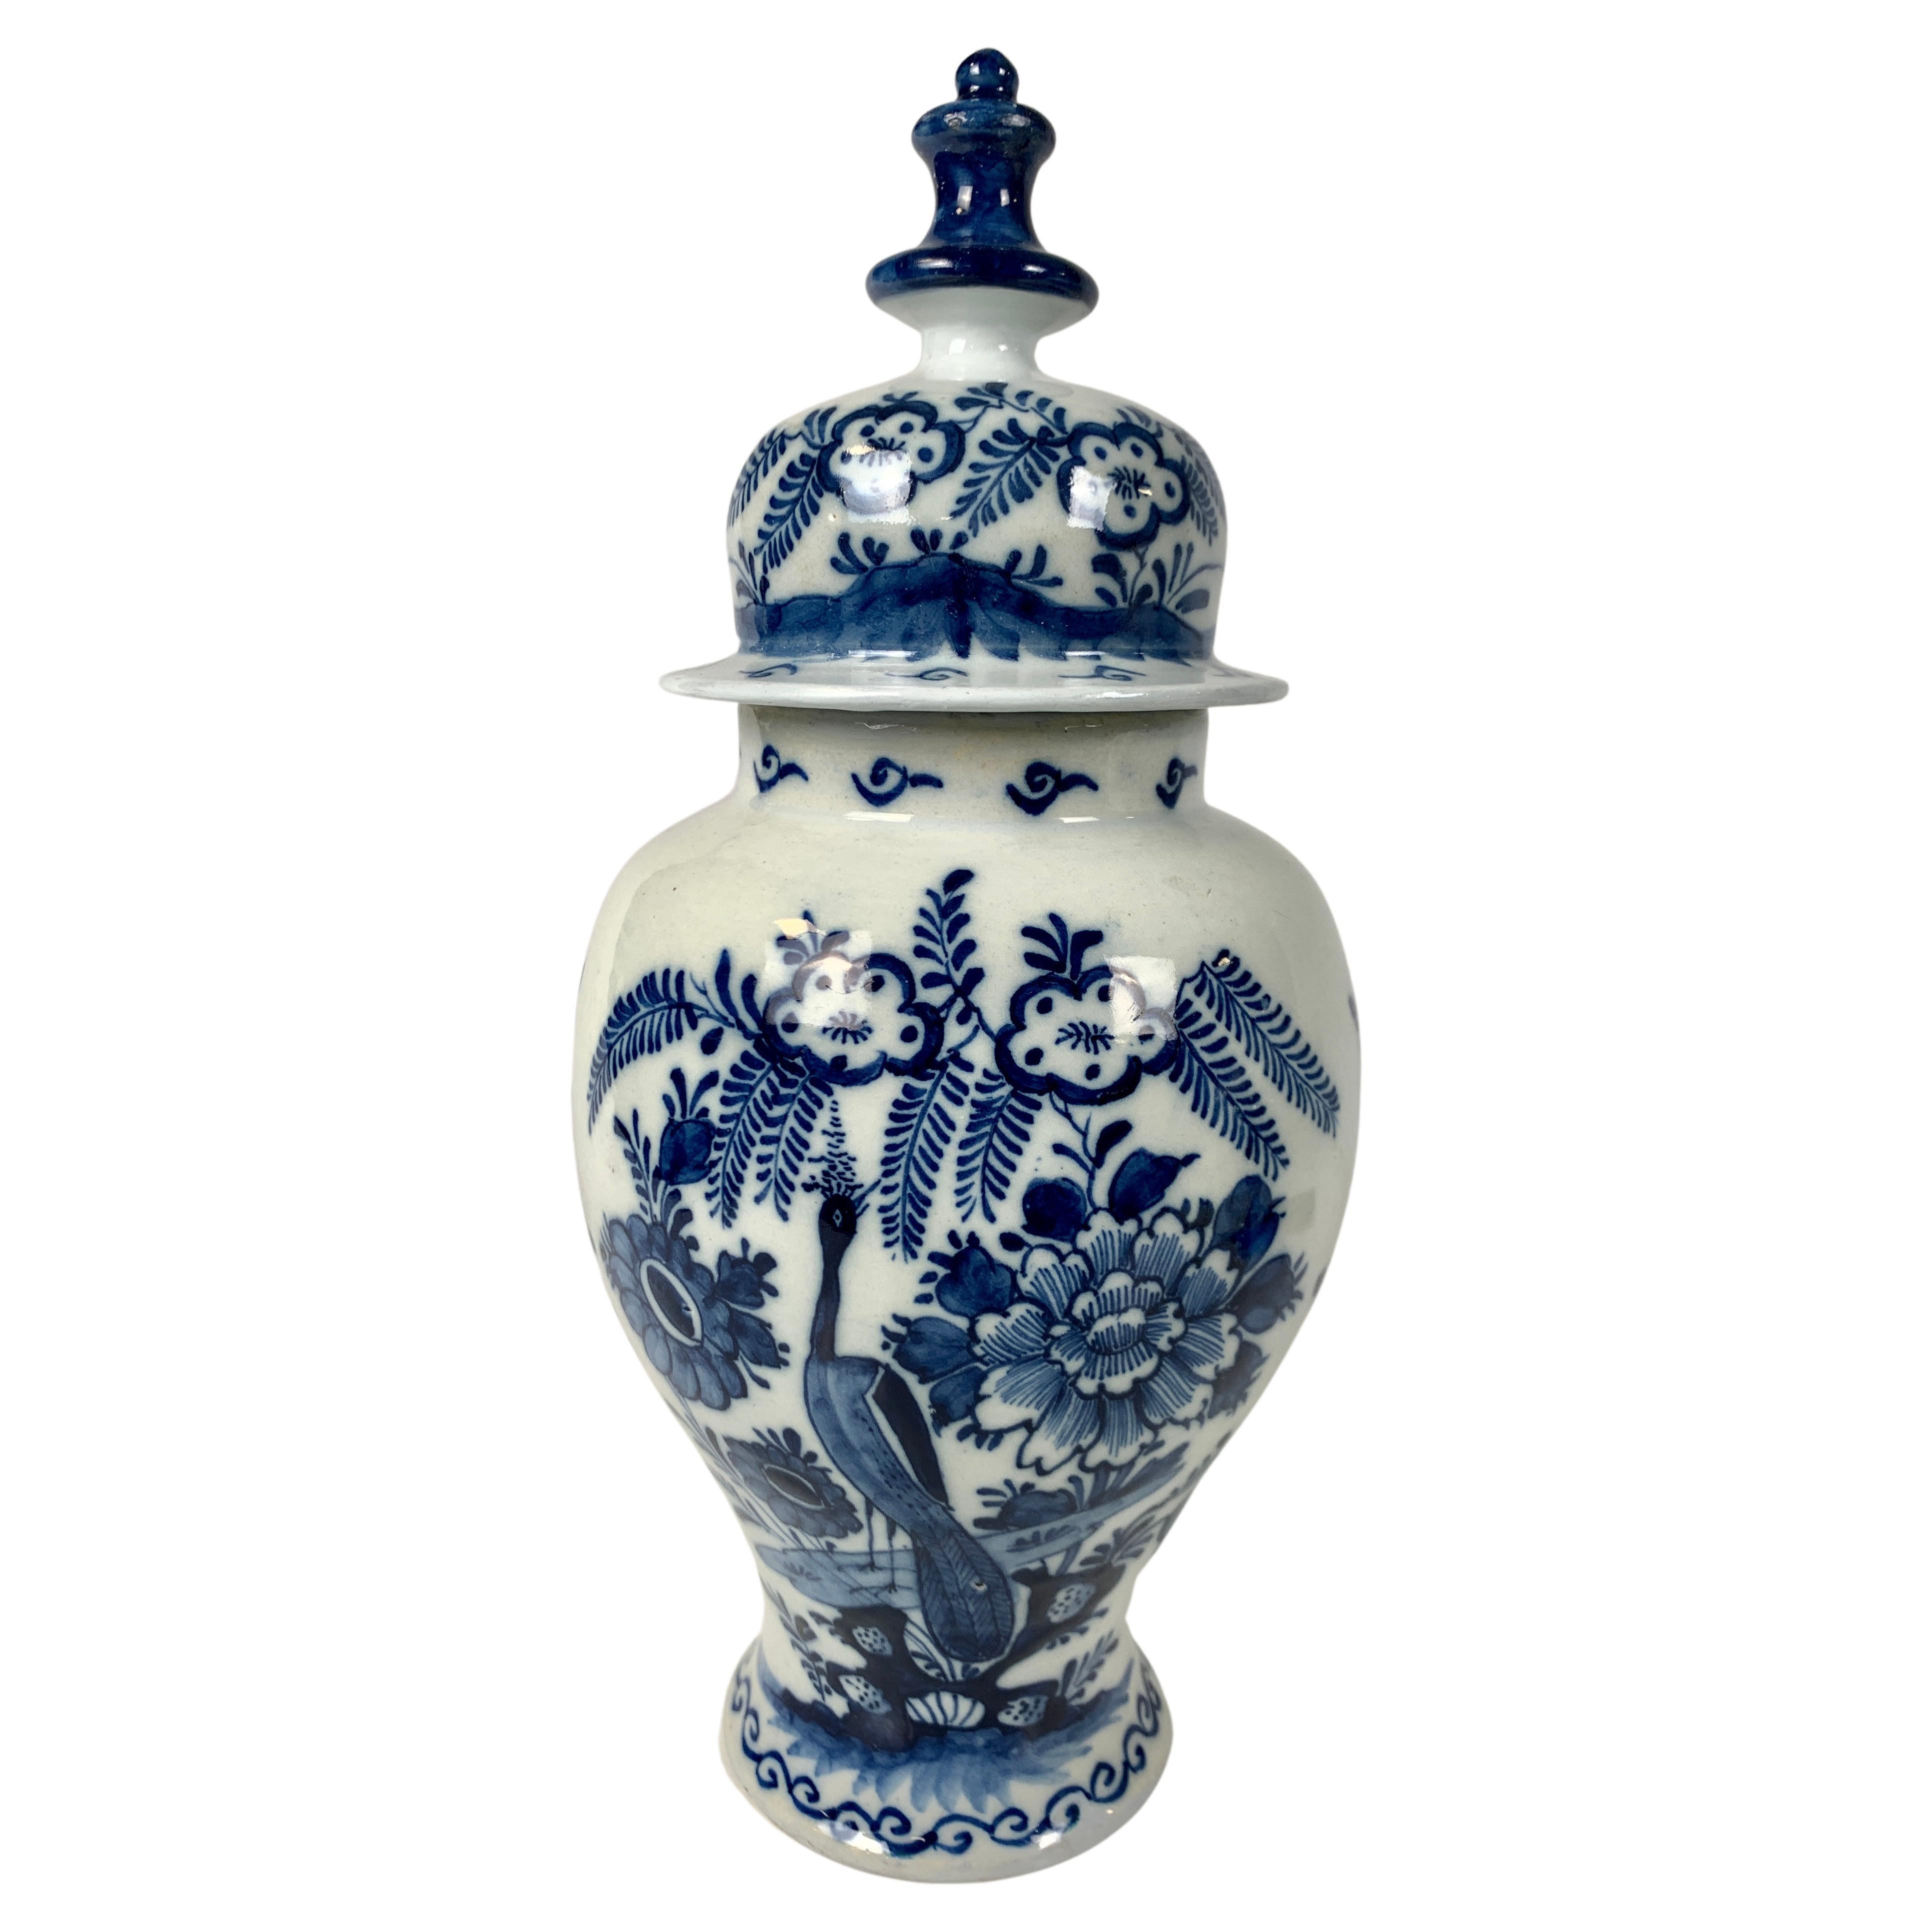 Blue and White Delft Mantle Jar Hand-Painted 18th Century Netherlands Circa 1780